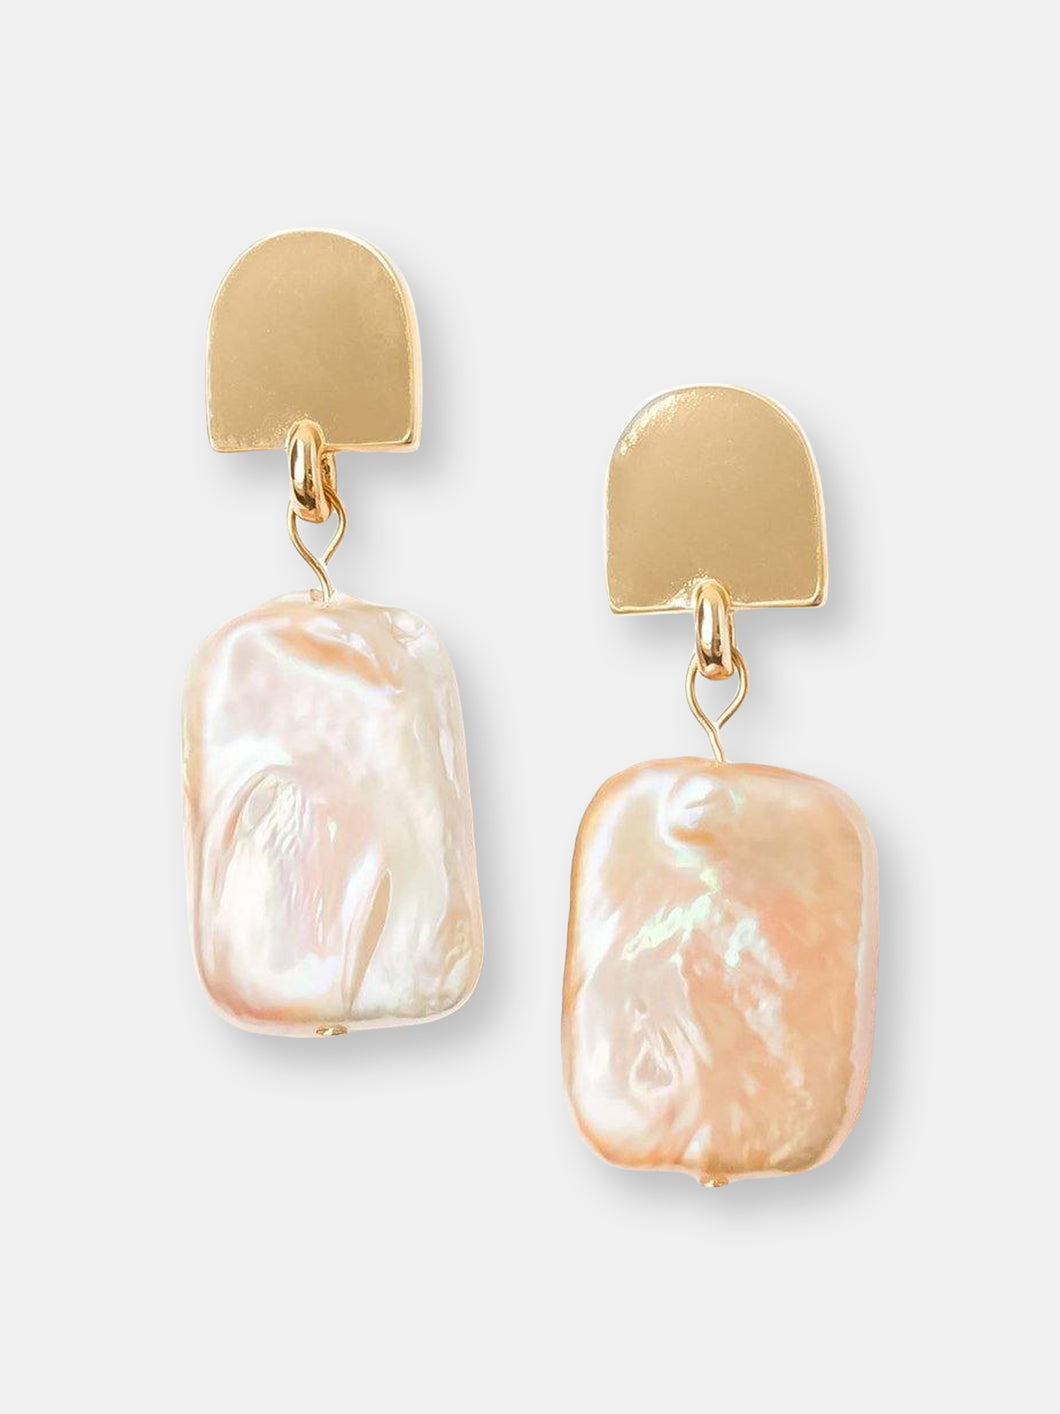 Gold Dome + Peachy Pearl Earrings